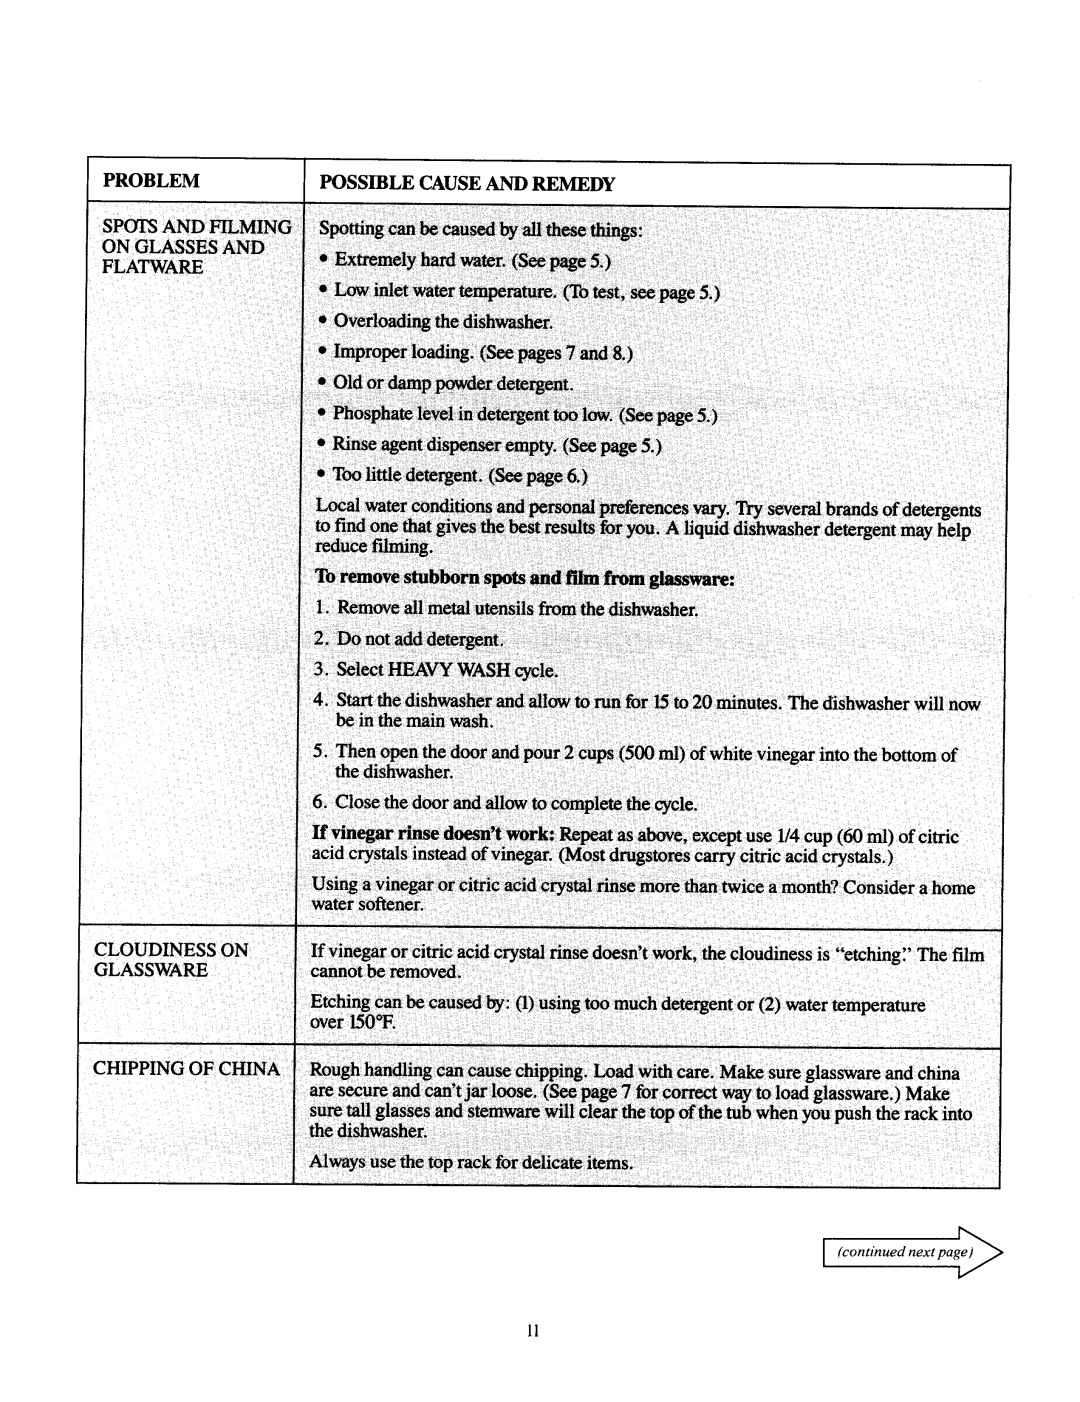 Jenn-Air DU430 manual Problem, Possible Cause And Remedy, continued nextpage 